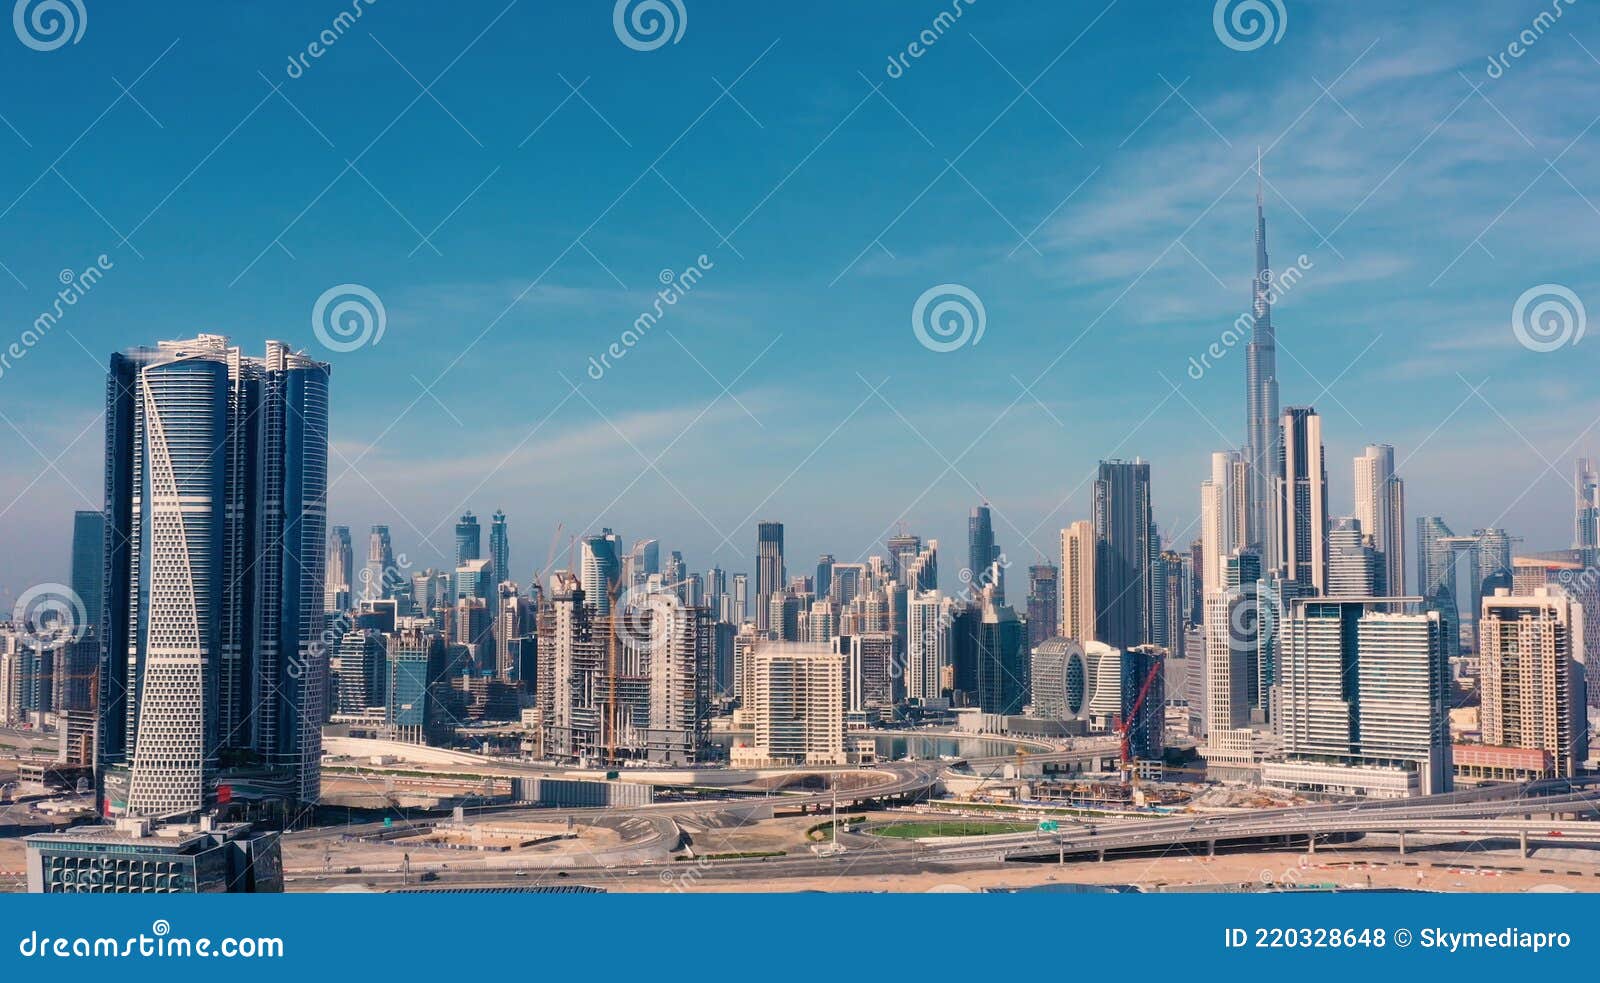 at forstå linned Morgenøvelser AERIAL. Drone Video of Dubai City at Day Time. Modern City Concept Vith  Transport and River Stock Photo - Image of burj, dubai: 220328648